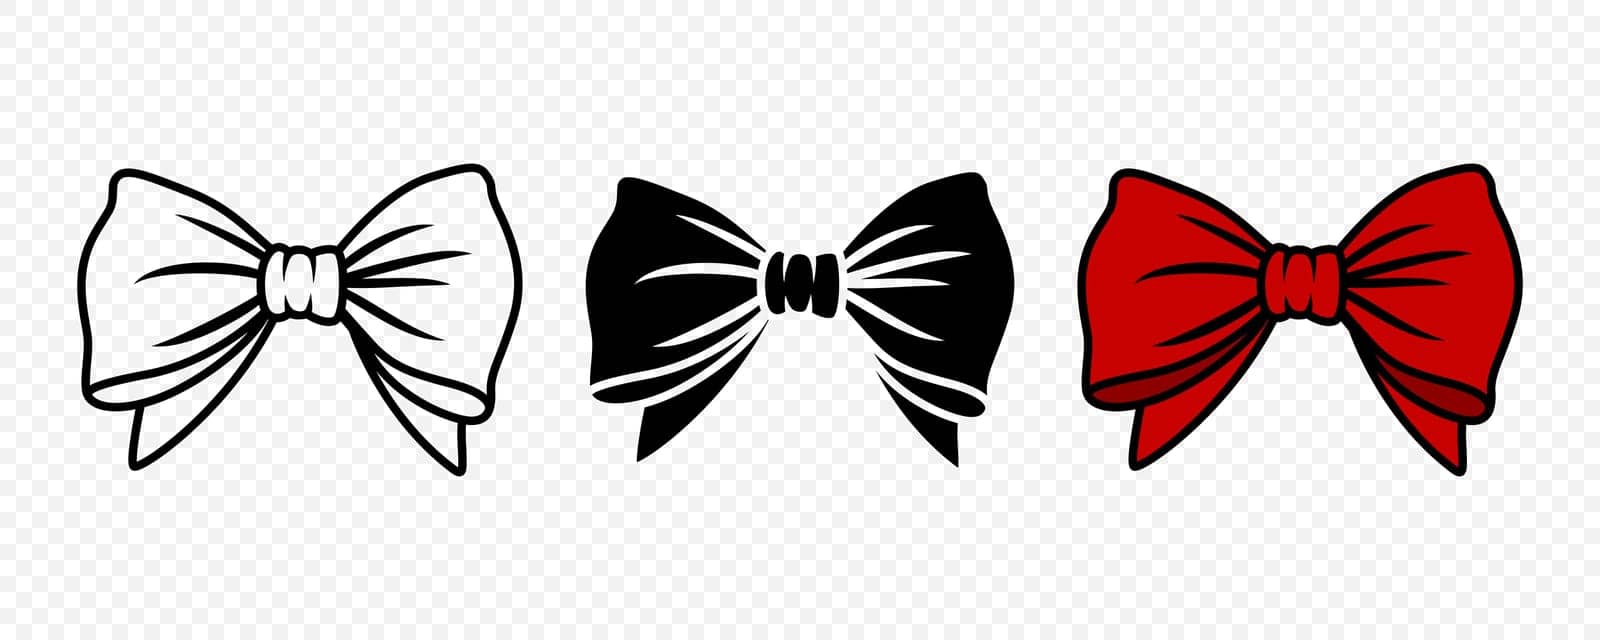 Vector Cartoon Bow Tie or Gift Bow, Cut Out and with Outline Icon Set Isolated. Bow Design Template by Gomolach